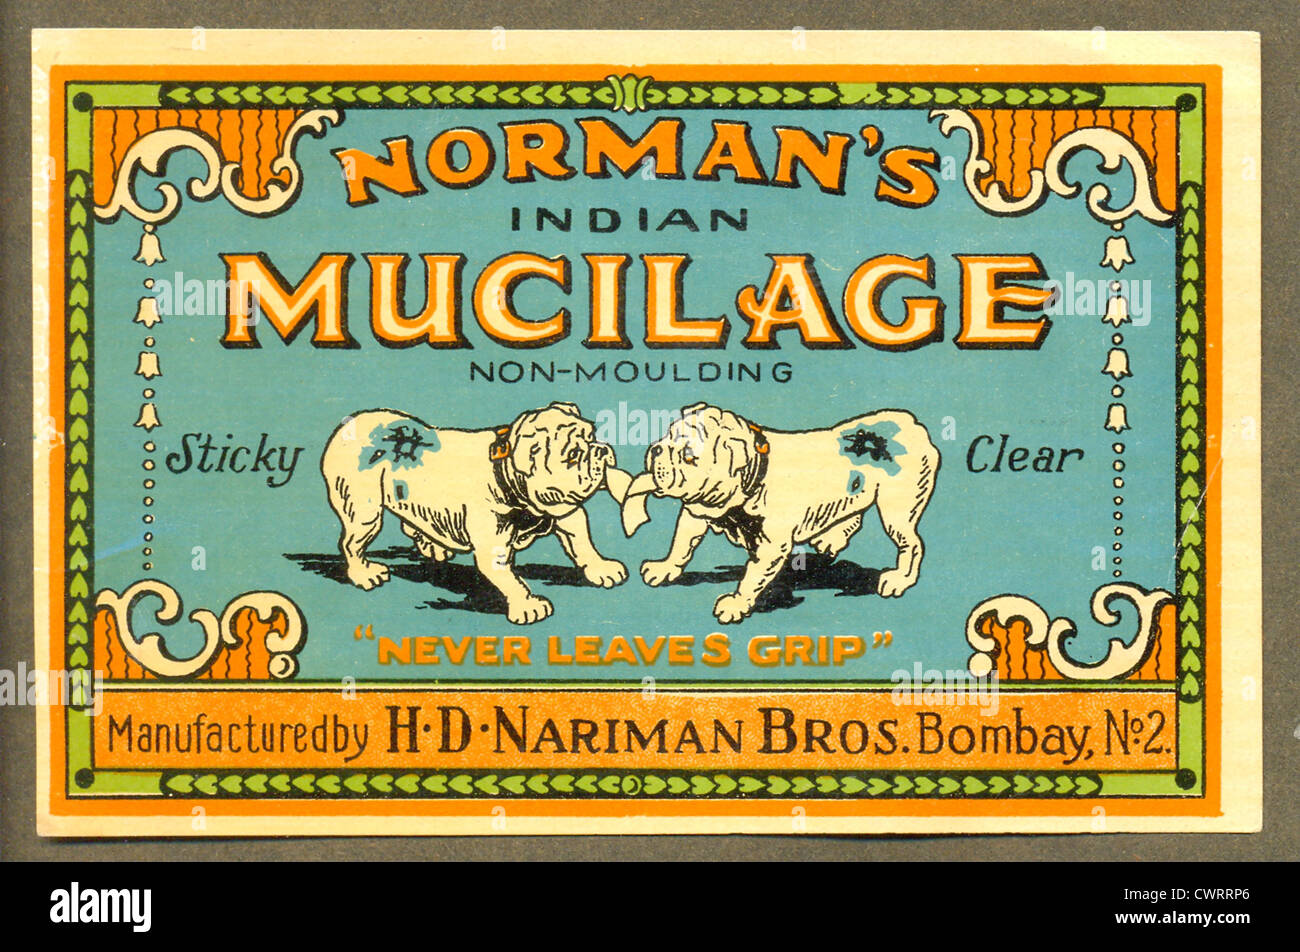 Label for Norman's Indian Mucilage Stock Photo